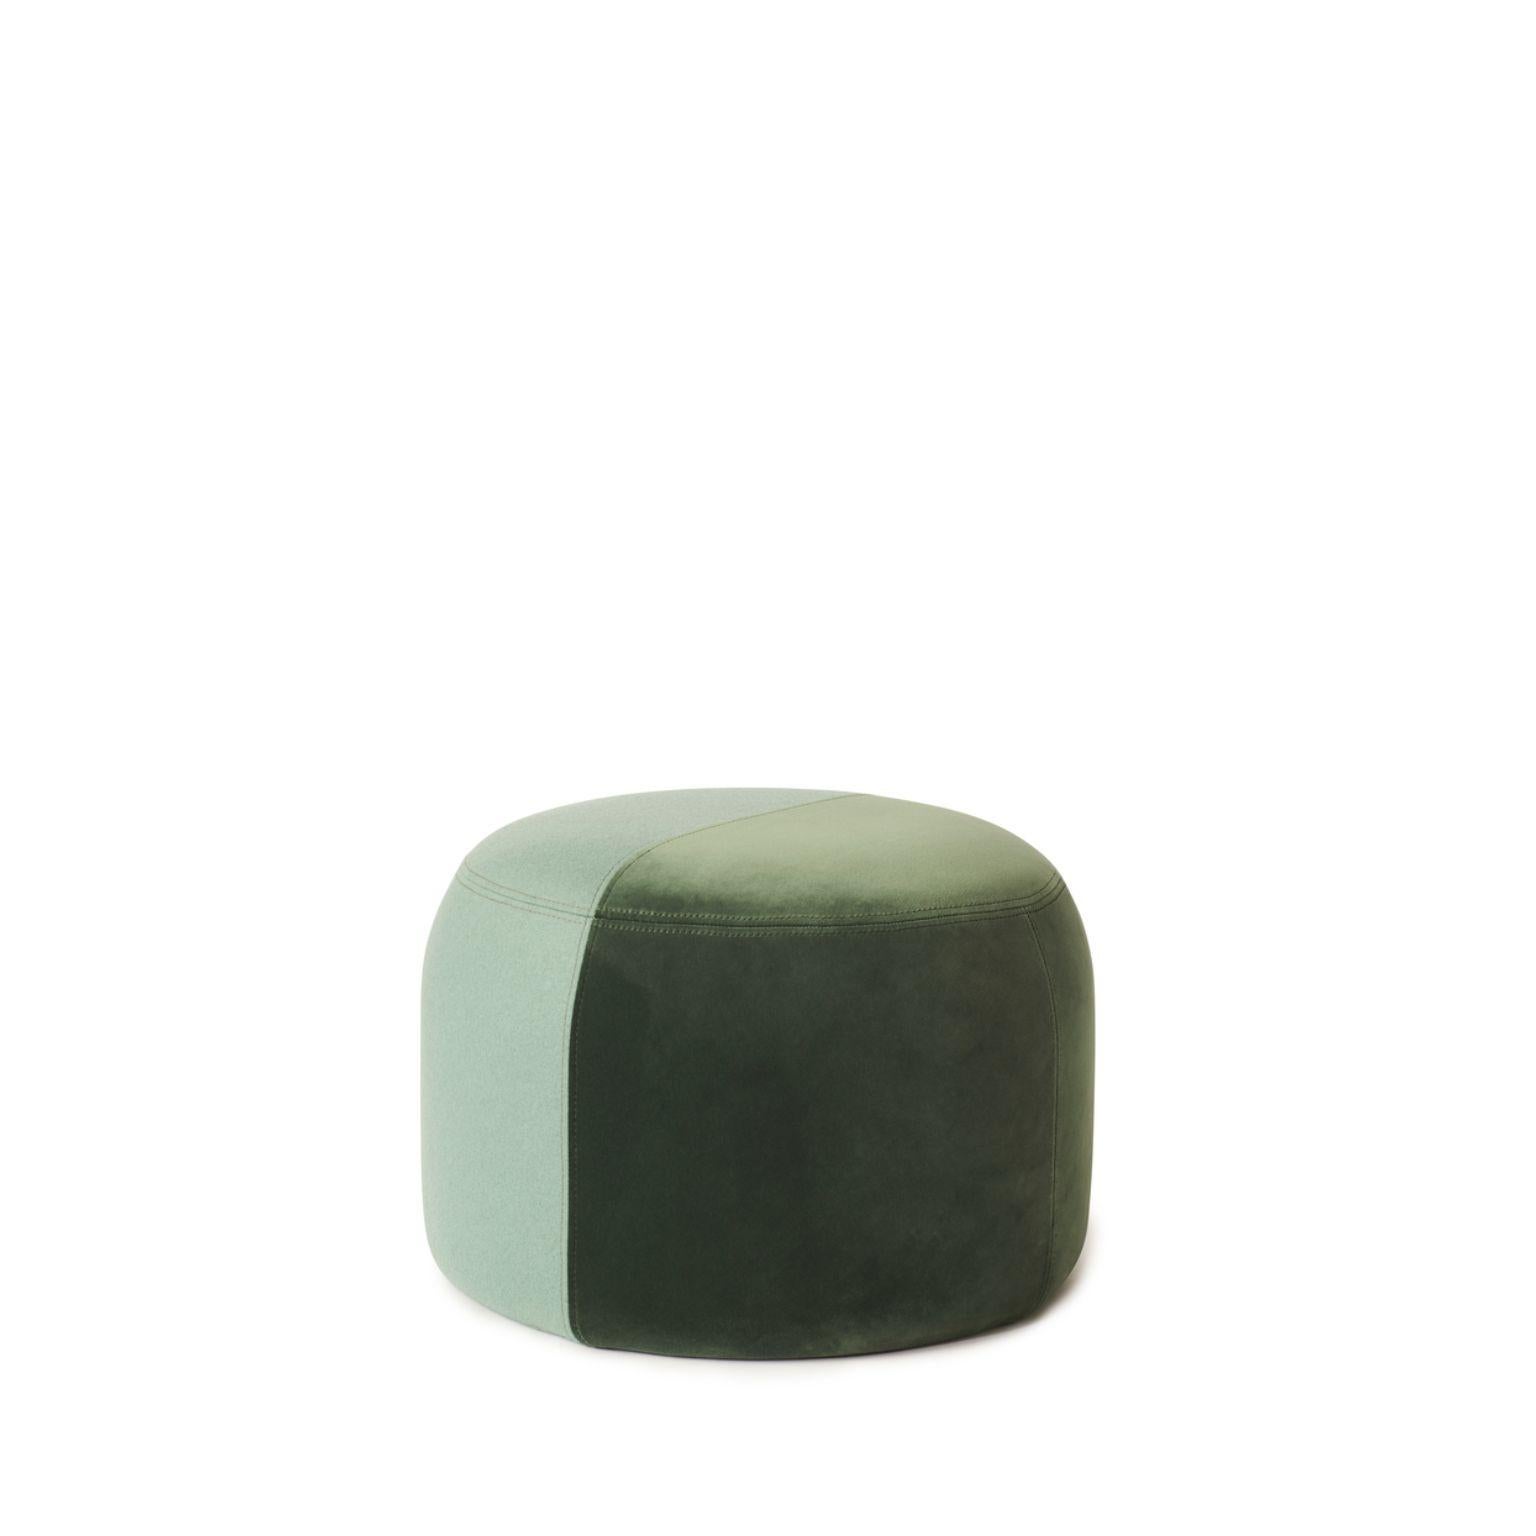 Dainty Pouf jade forest green by Warm Nordic
Dimensions: D 55 x H 39 cm
Material: Textile upholstery, Wooden frame, foam.
Weight: 9.5 kg
Also available in different colours and finishes.

Sophisticated, two-coloured pouf with soft shapes and a clean